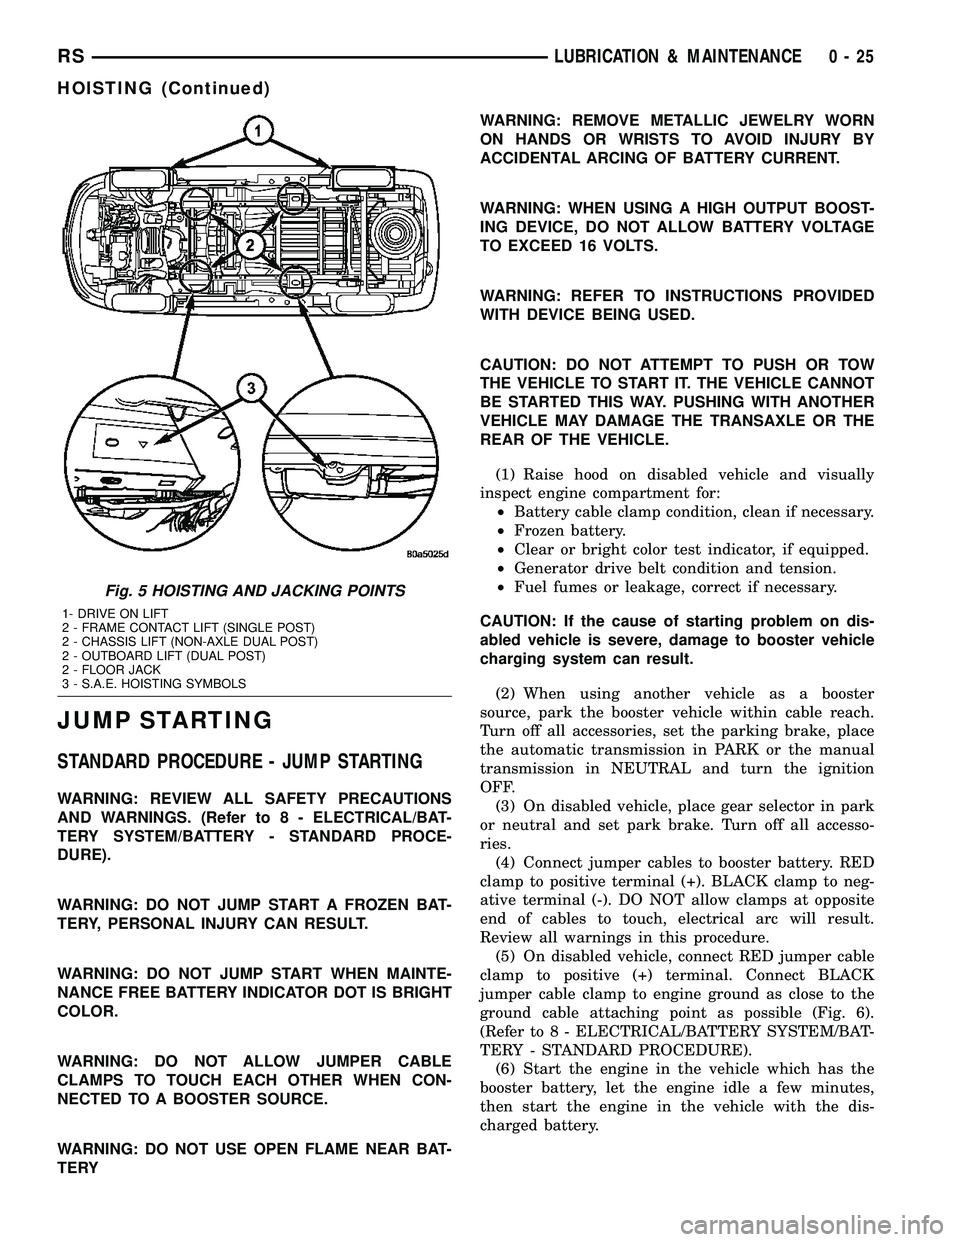 CHRYSLER CARAVAN 2005 Owners Guide JUMP STARTING
STANDARD PROCEDURE - JUMP STARTING
WARNING: REVIEW ALL SAFETY PRECAUTIONS
AND WARNINGS. (Refer to 8 - ELECTRICAL/BAT-
TERY SYSTEM/BATTERY - STANDARD PROCE-
DURE).
WARNING: DO NOT JUMP ST